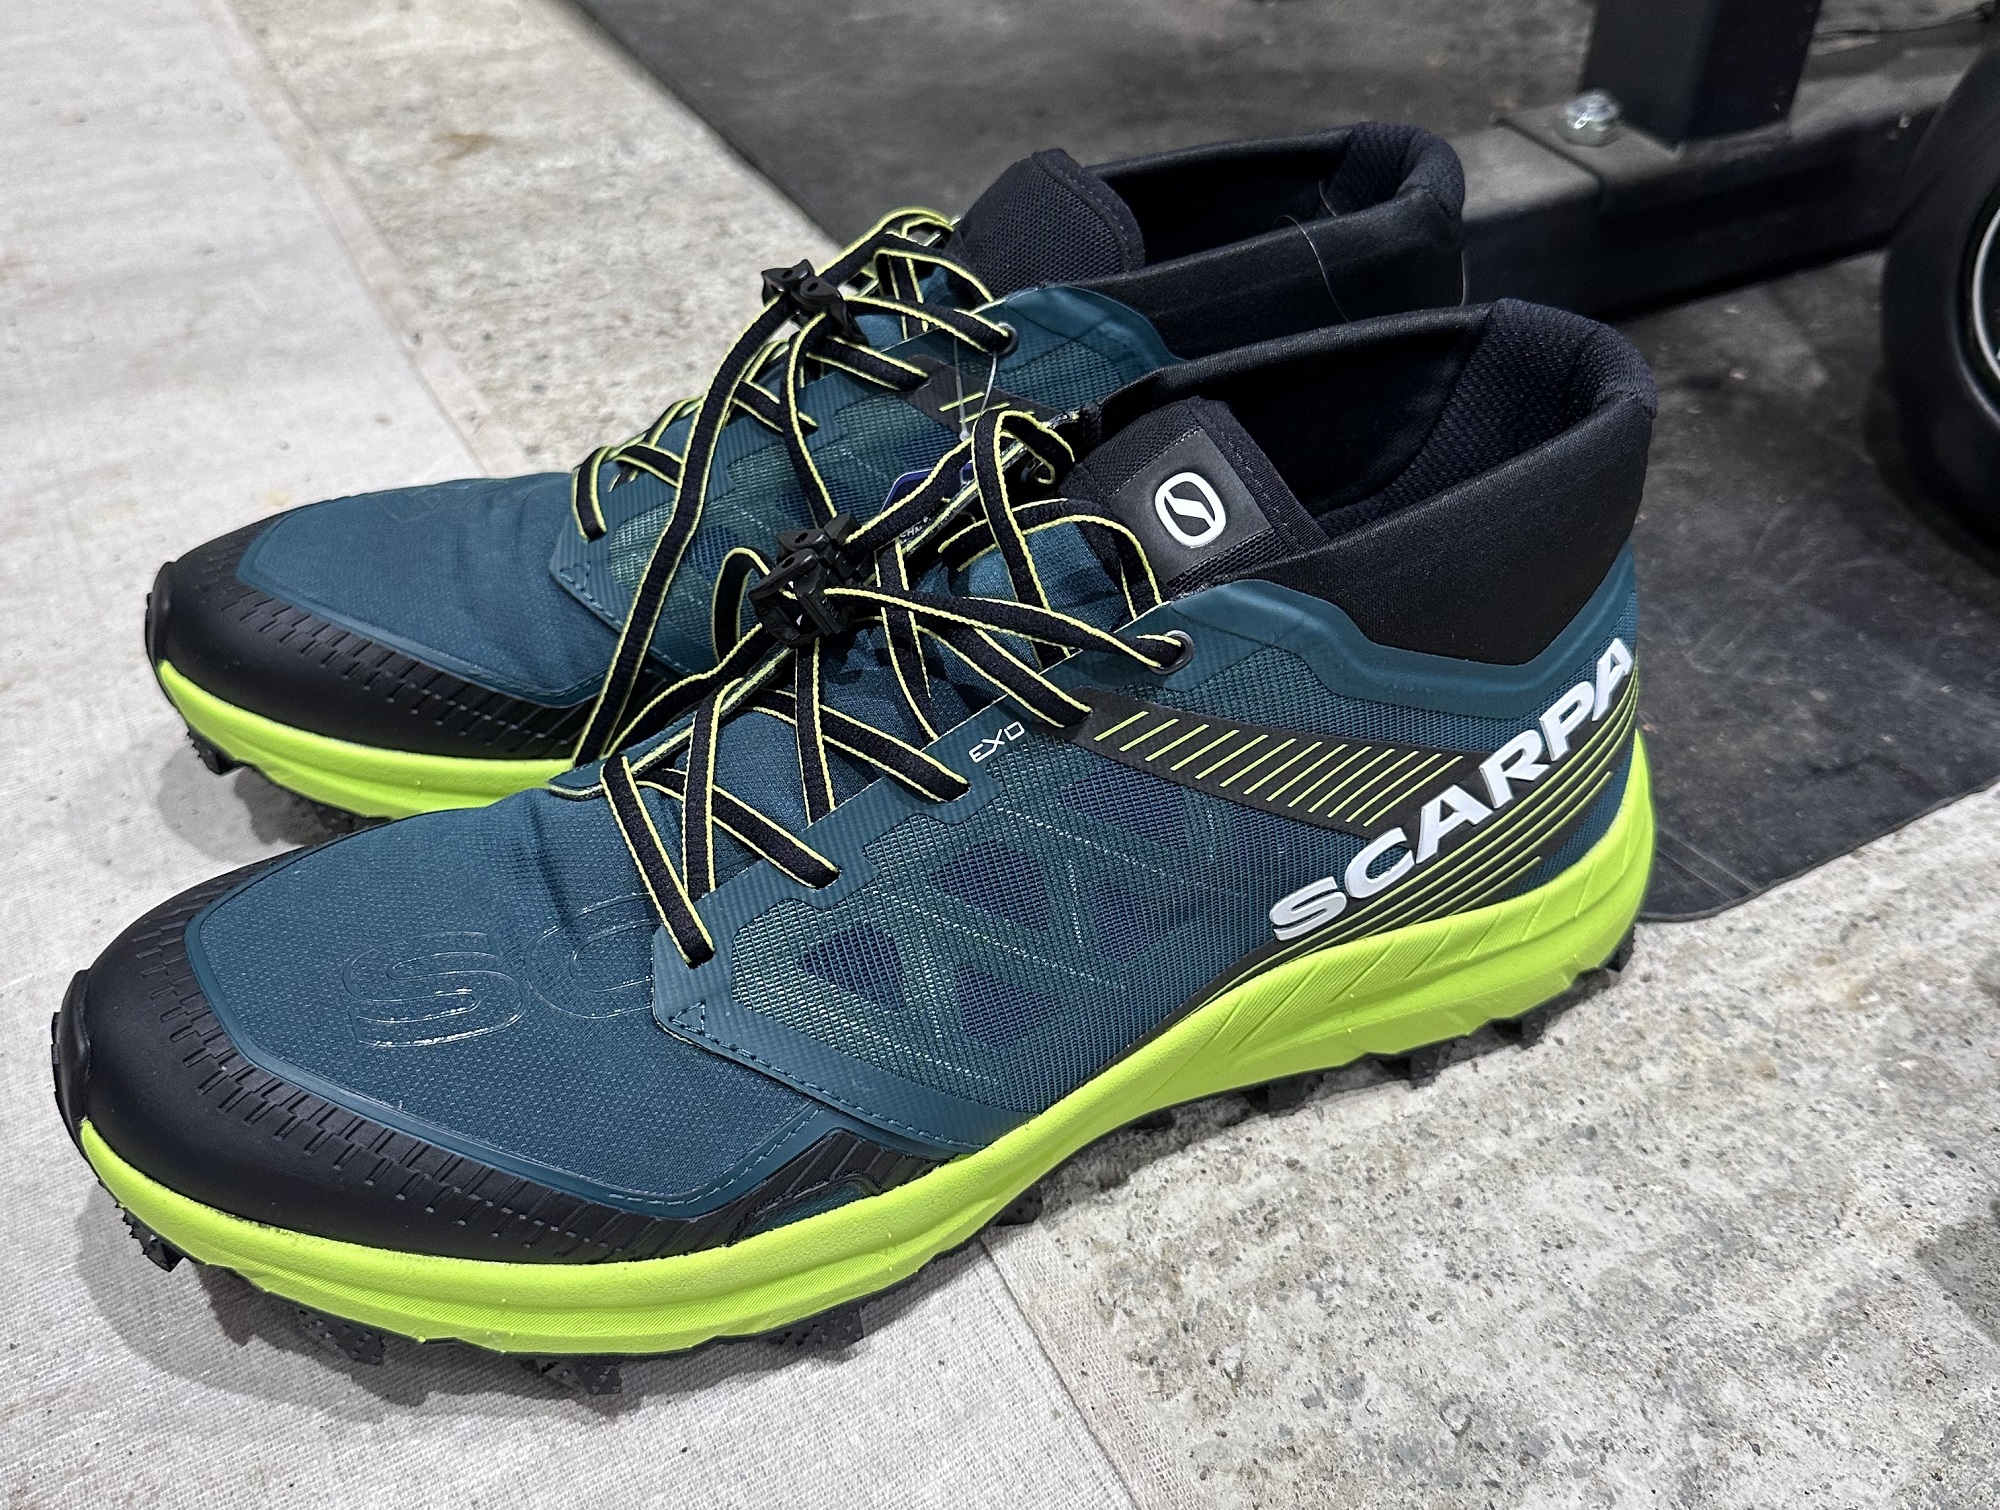 Scarpa Spin ST shoes